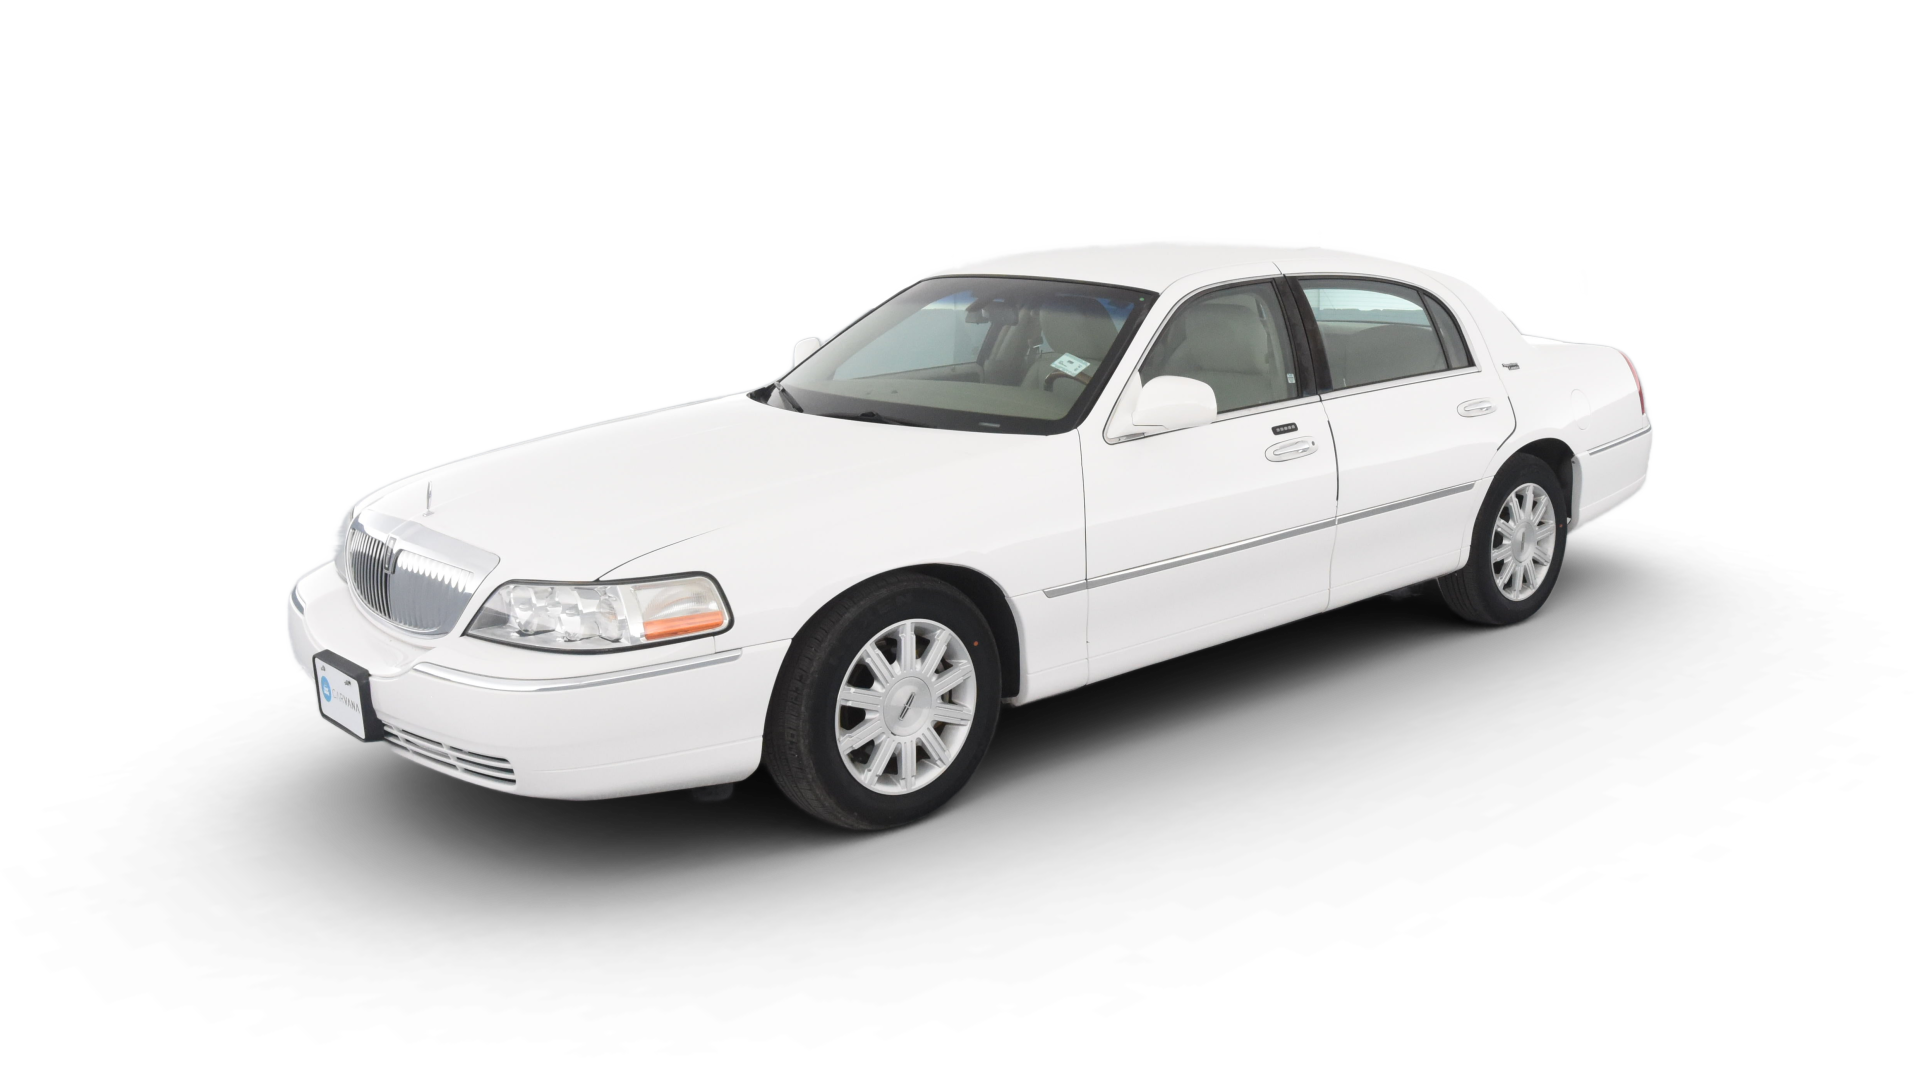 Lincoln Town Car model image.